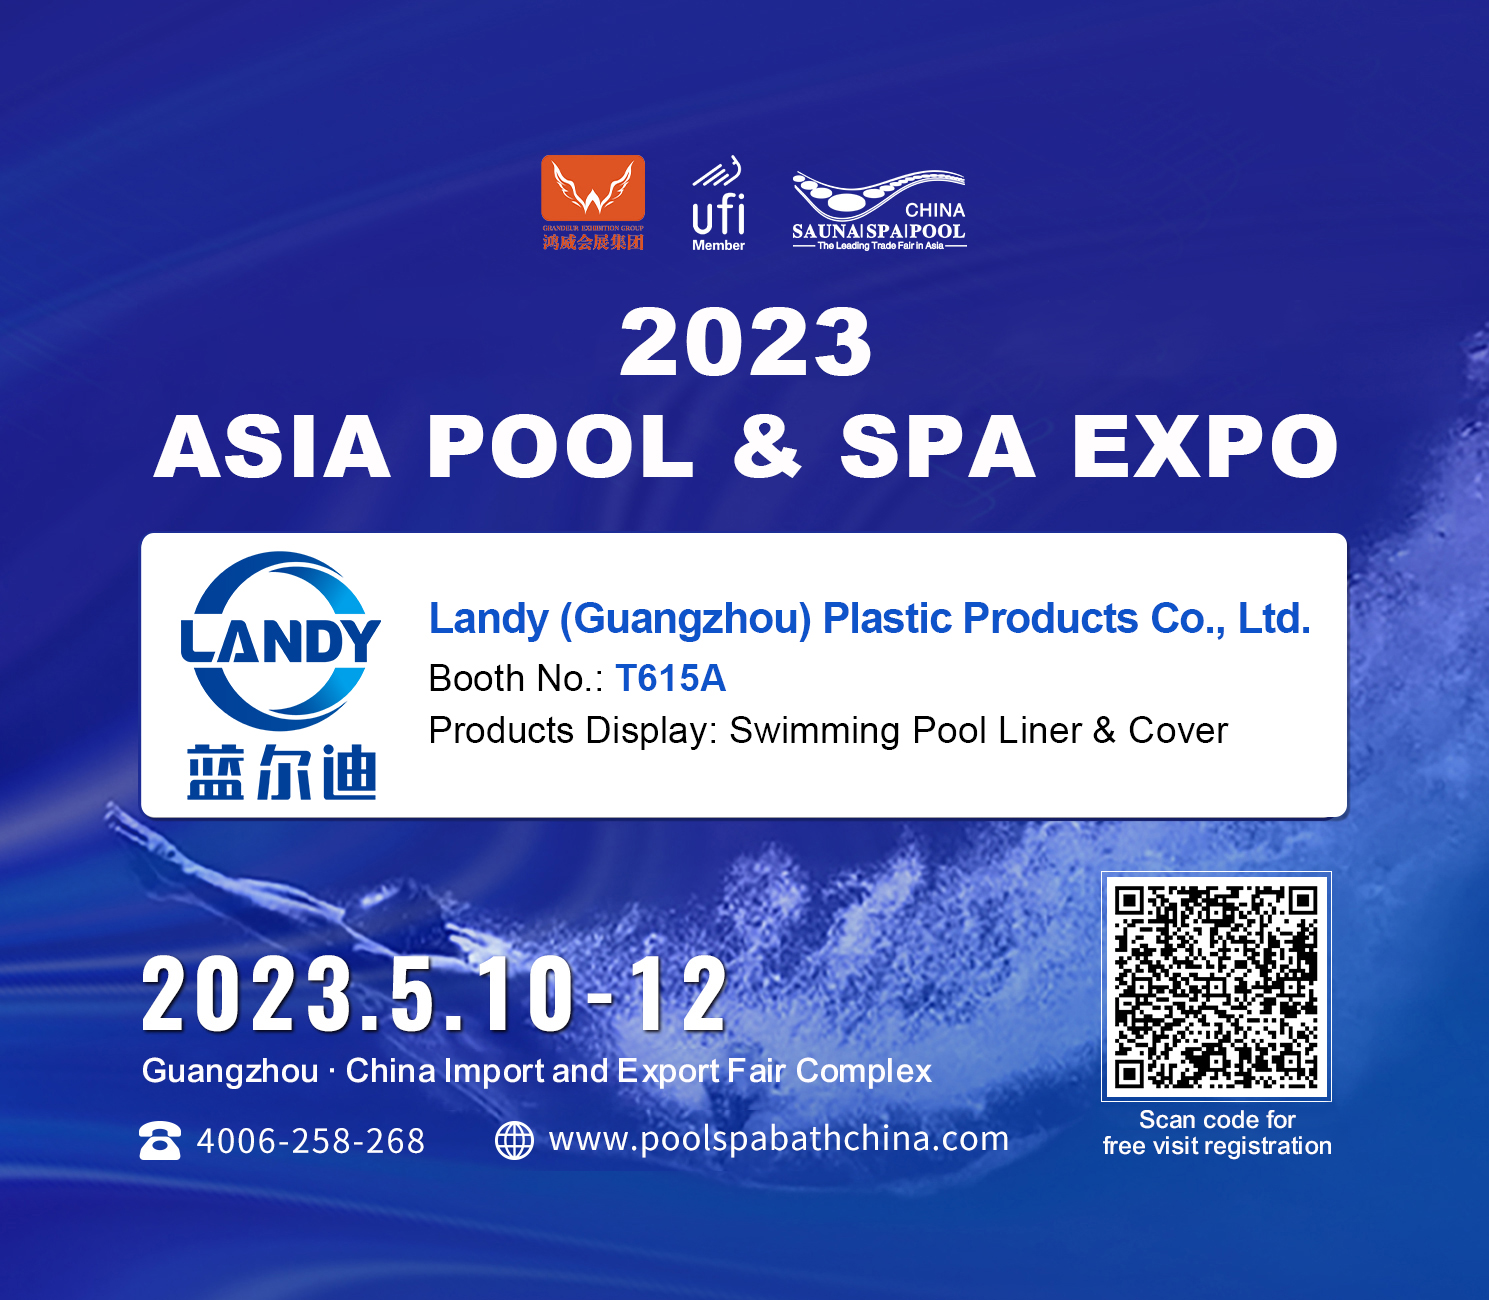 Landy Will Meet You At The 2023 ASIA POOL SPA EXPO